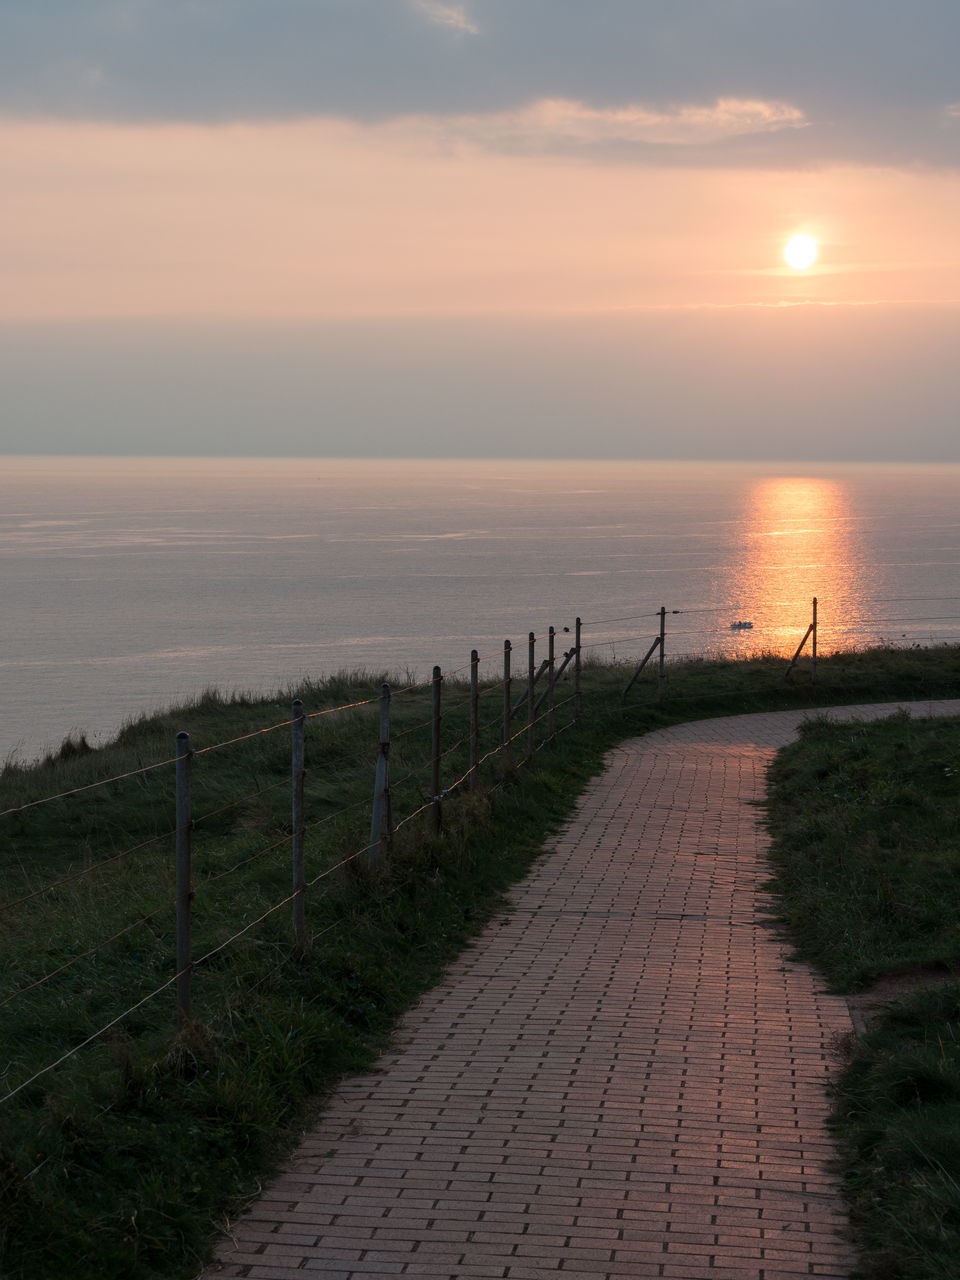 FOOTPATH BY SEA AGAINST SUNSET SKY